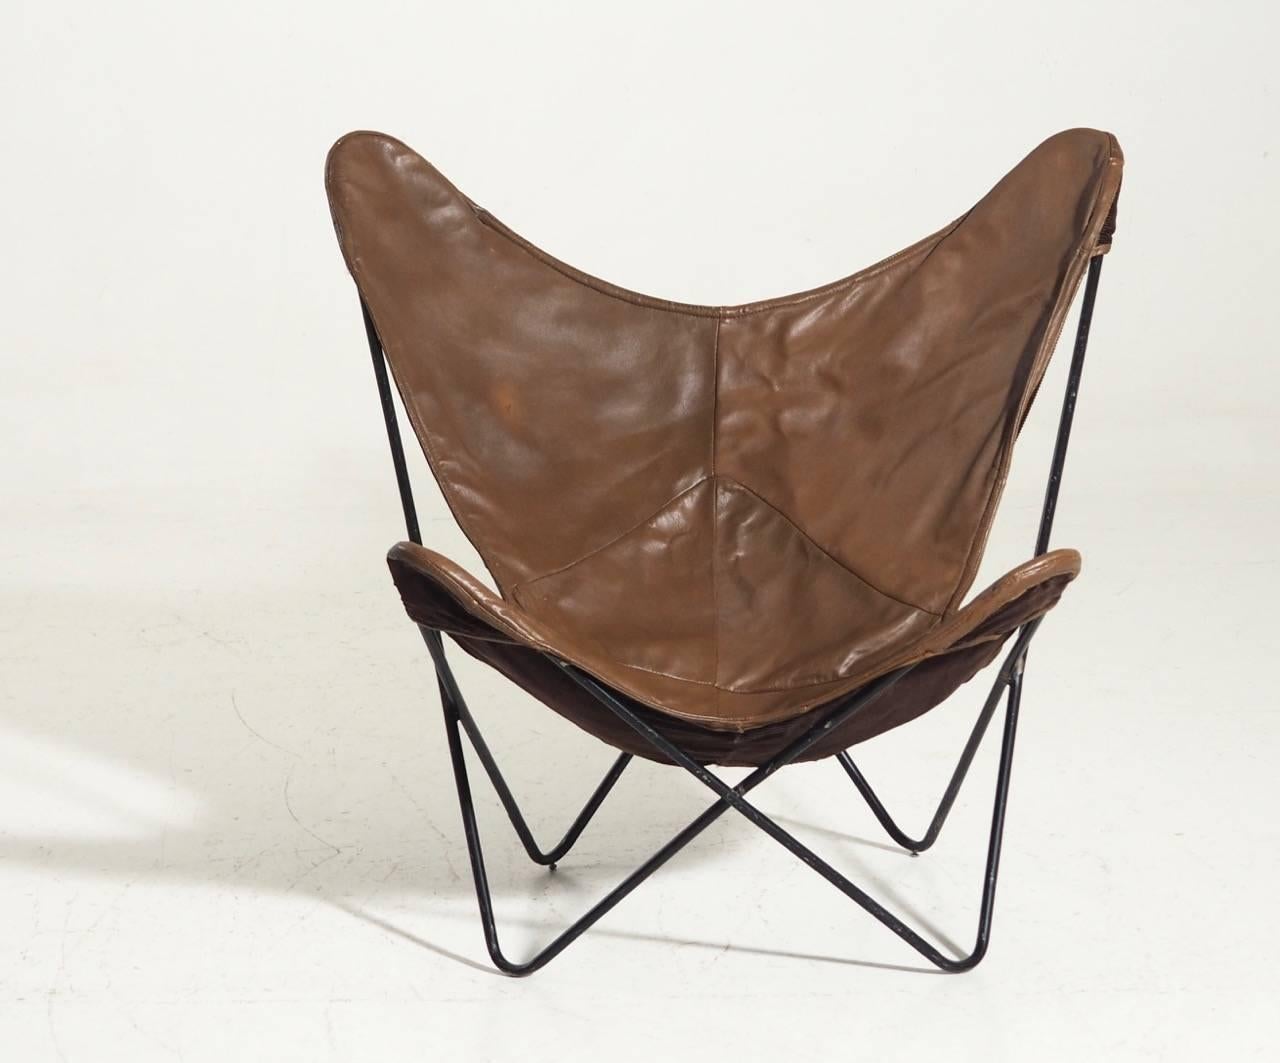 Original butterfly / bat chair produced by Knoll from 1947-1973 and designed by Jorge Ferrari Hardoy. The chair is in brown leather and black steel frame.